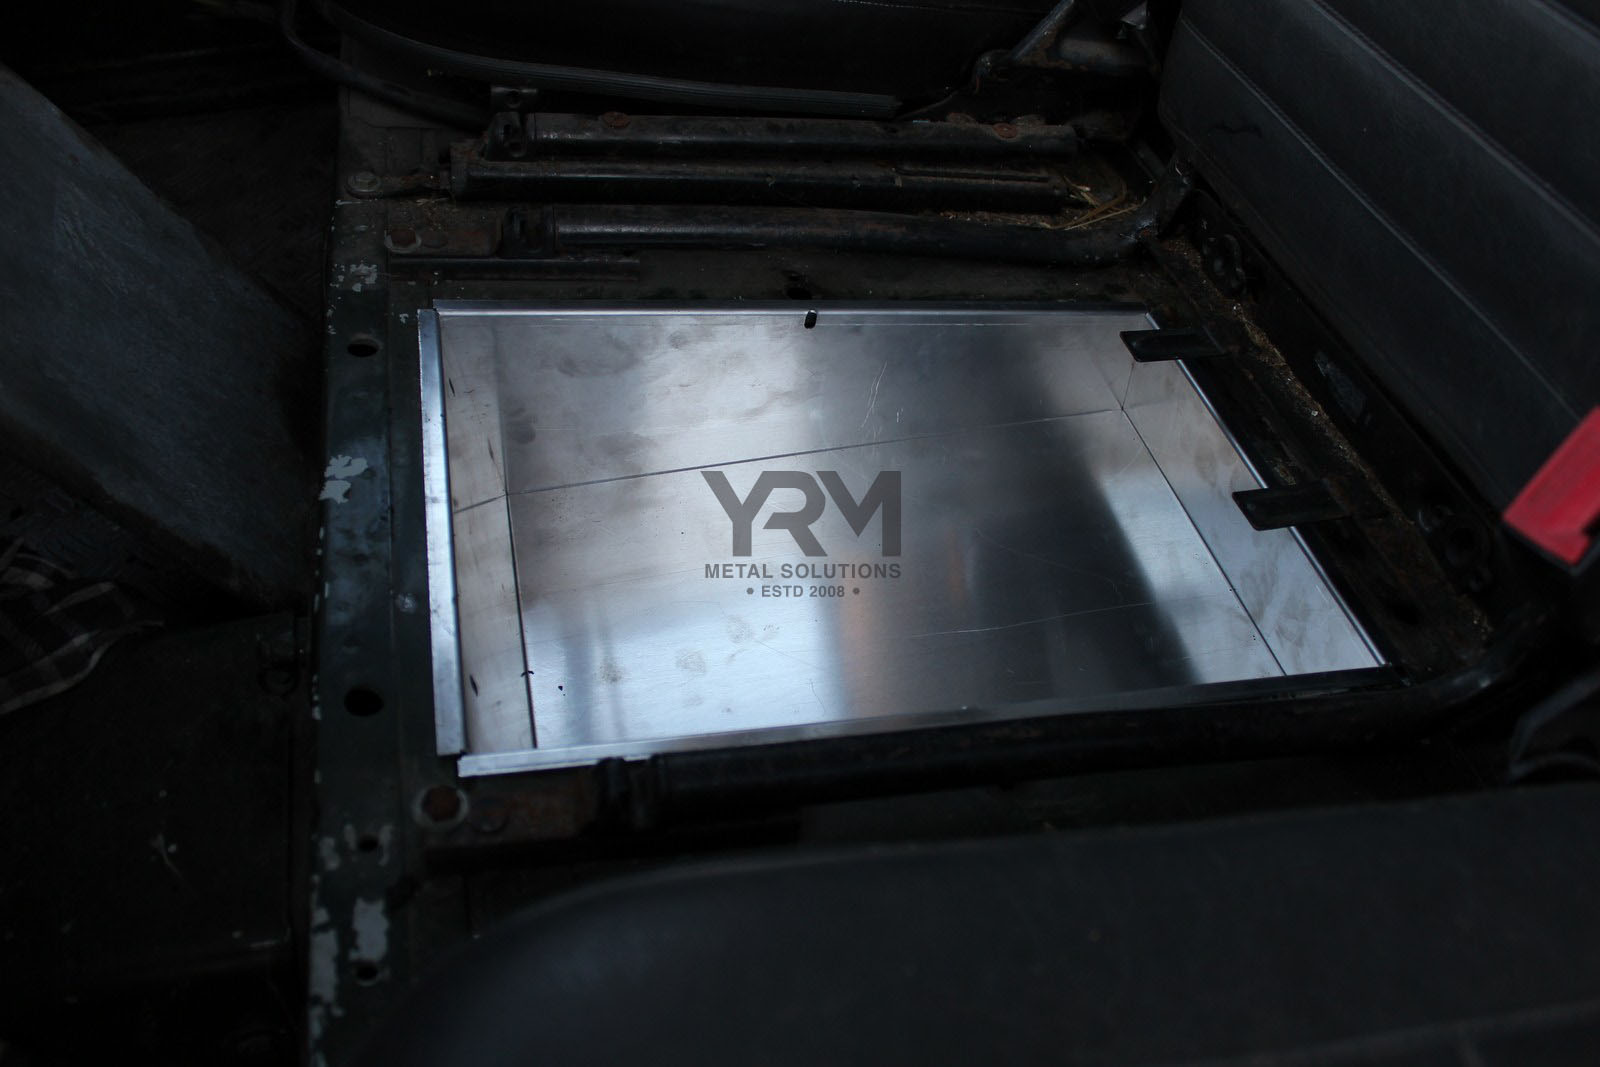 Series land rover centre underseat tool tray